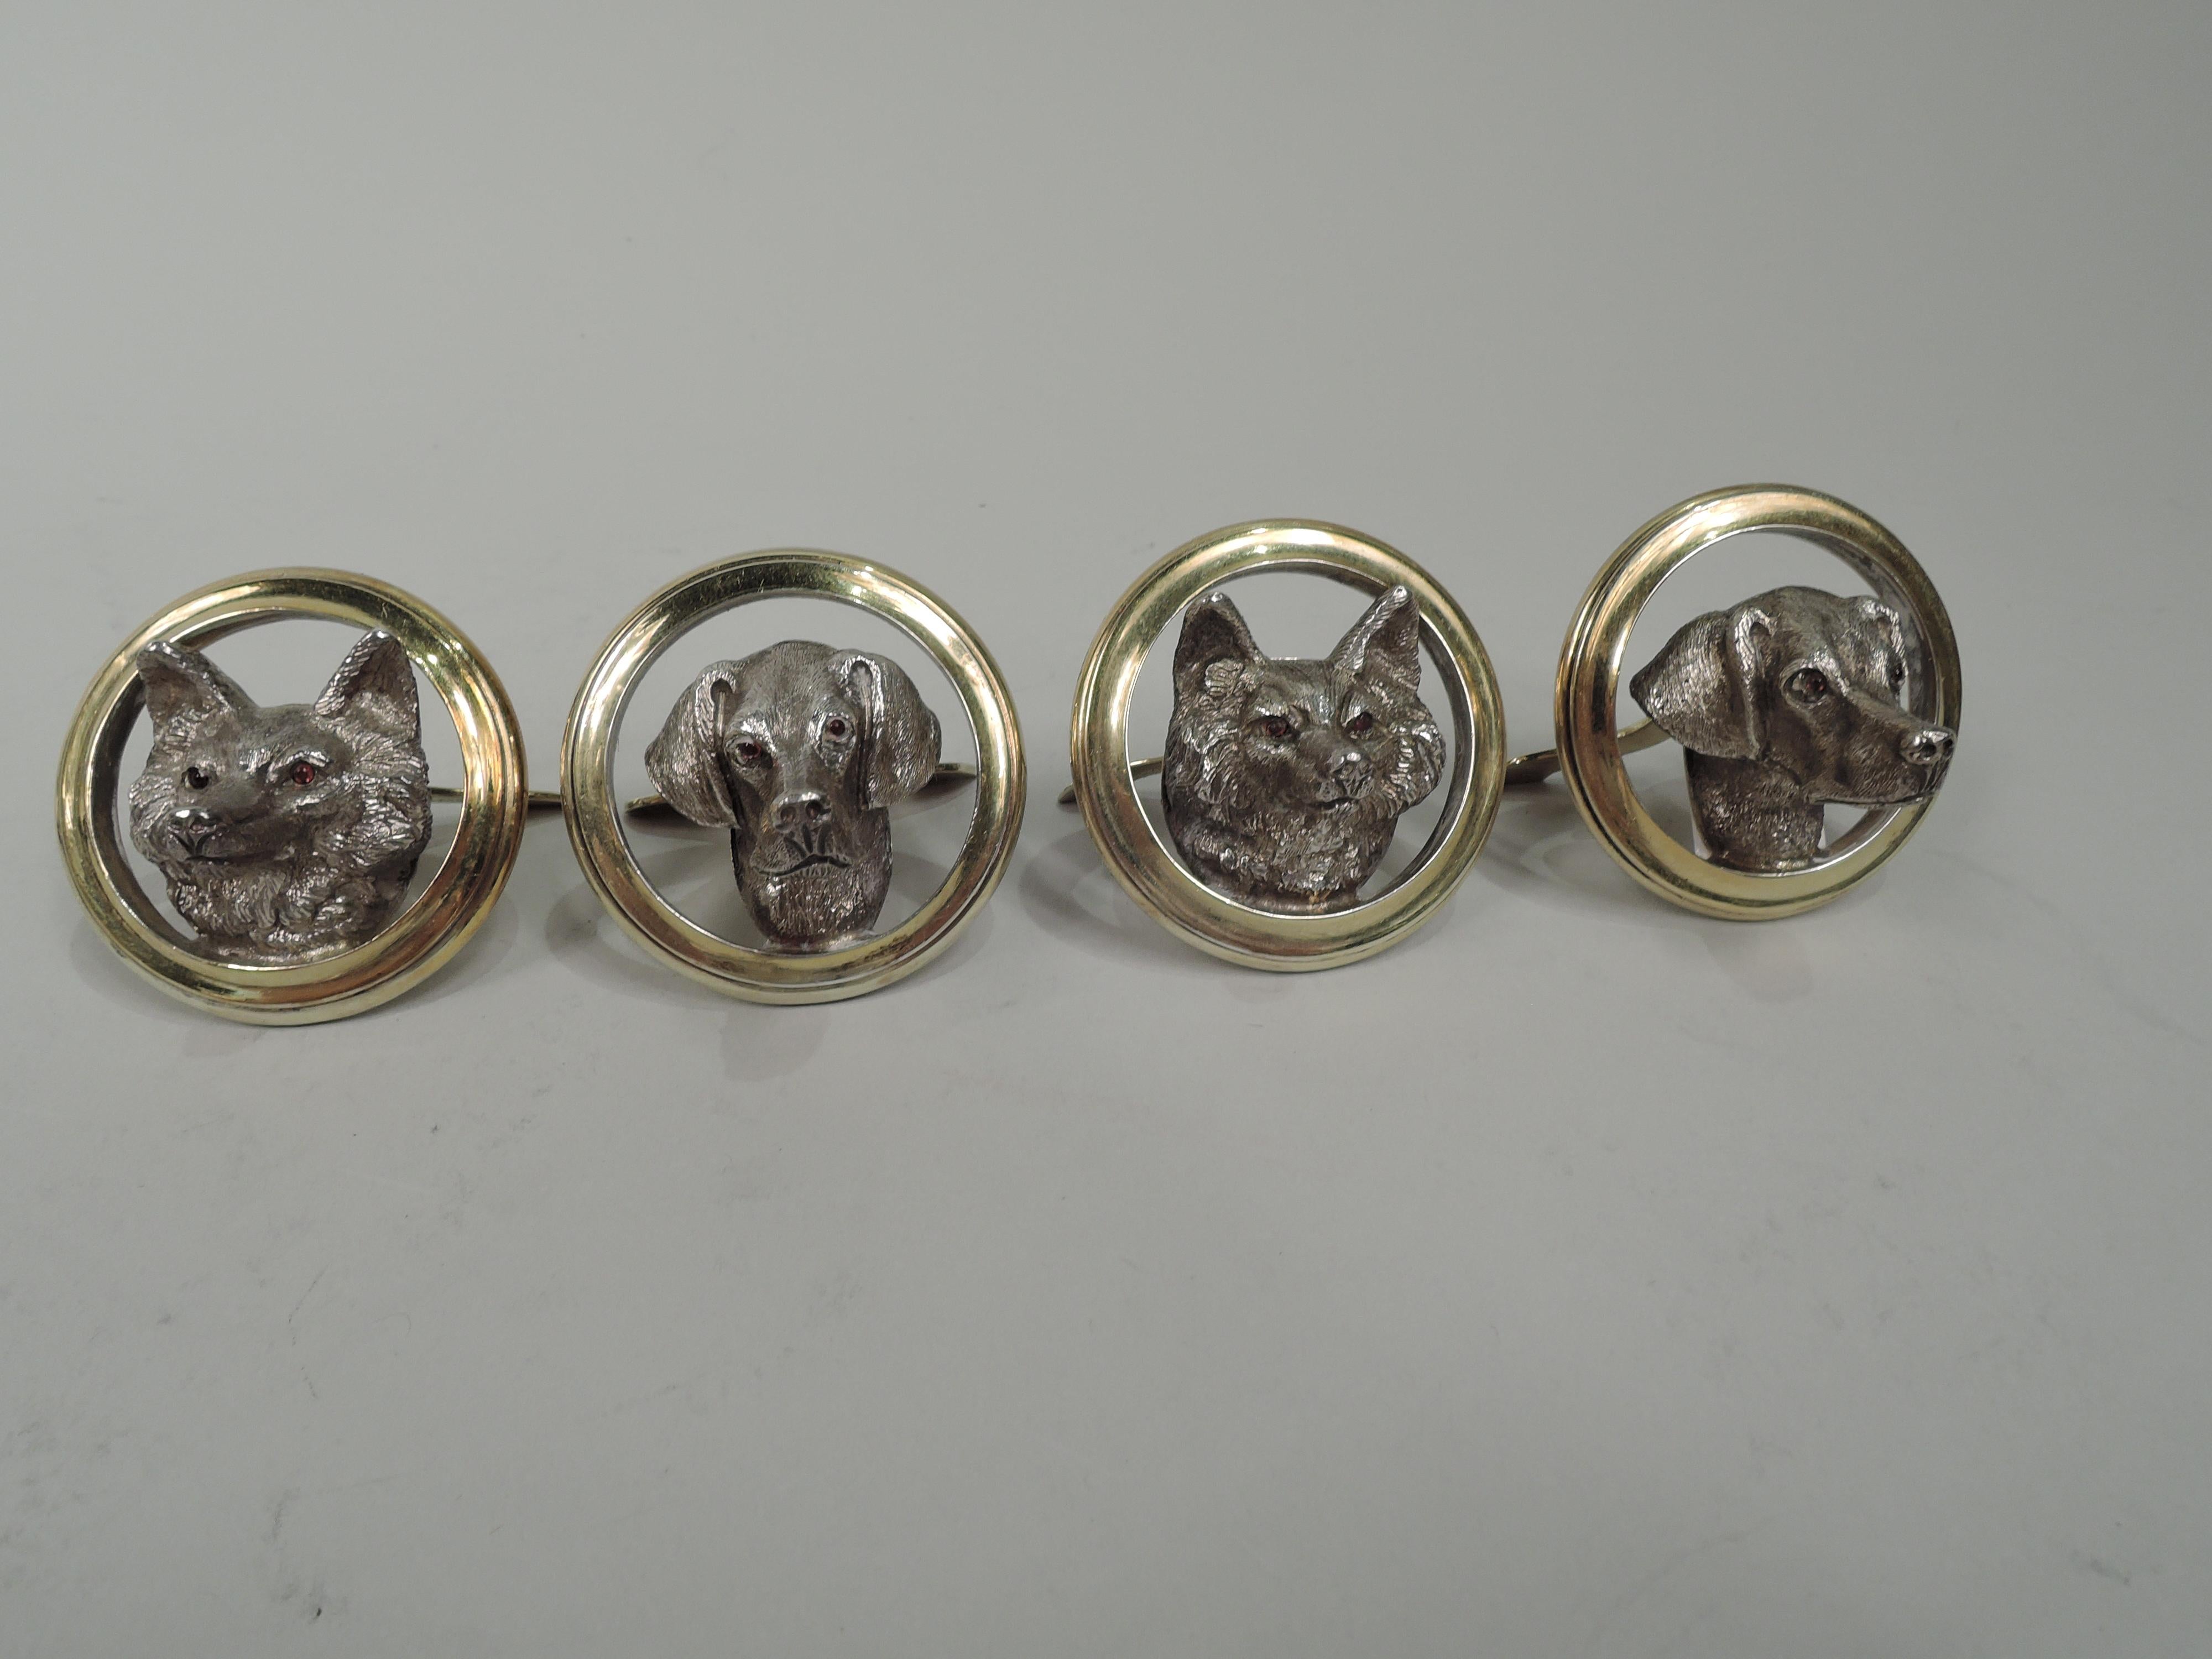 Set of 4 George V sterling silver place card holders. Made by Goldsmiths & Silversmiths in London in 1911. Each: Round gilt ring inset with cast animal head. Two holders have fox heads and two have hound heads. Prey and predator have long pointed